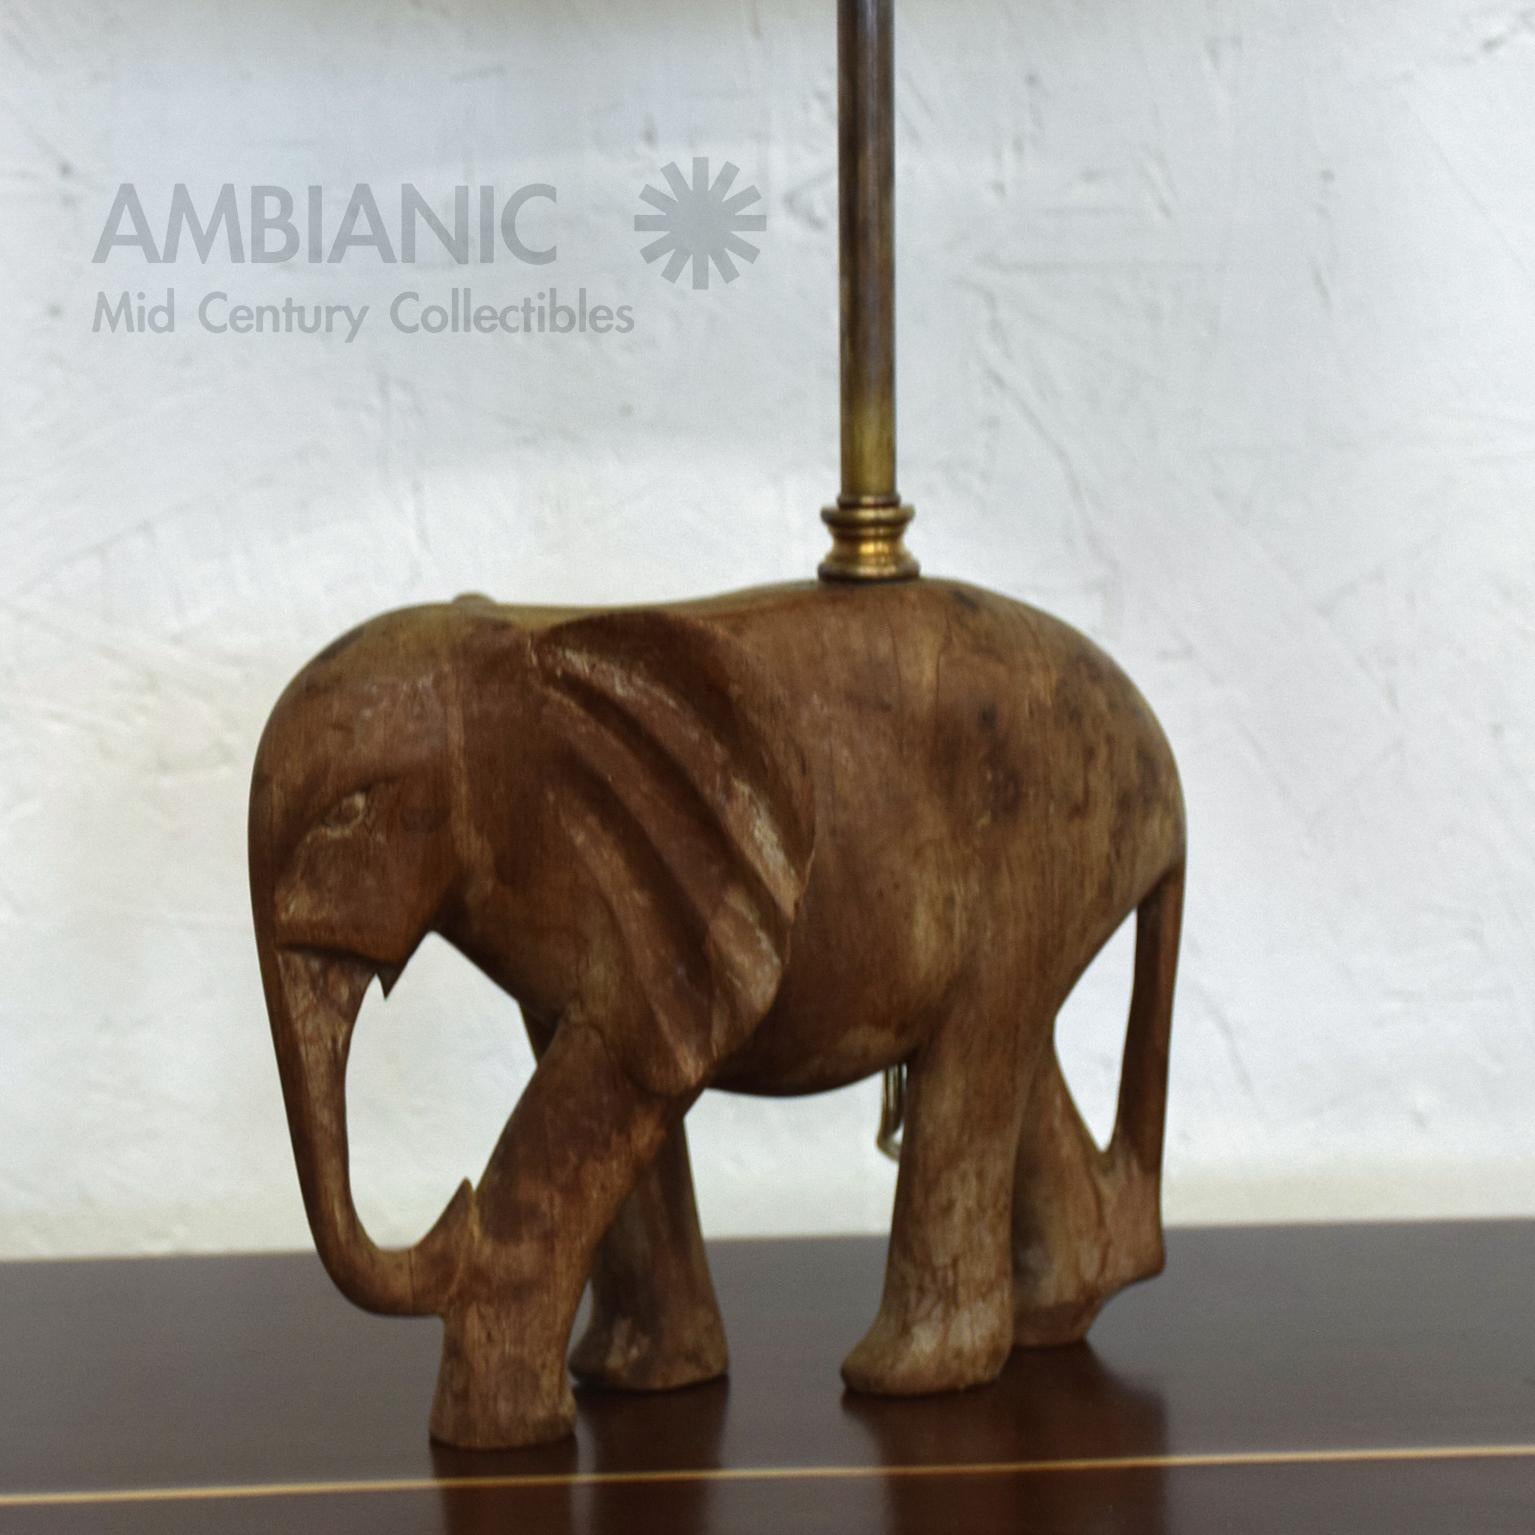 Table Lamp
Hand Carved Wood Elephant Sculpture Table Lamp circa 1950s.
In the style of James Mont and Maitland Smith.
18.38 x 9.5 W x 5 D.
Original Unrestored Vintage Preowned Fair Condition. Patinated Wood appears to be walnut retaining its